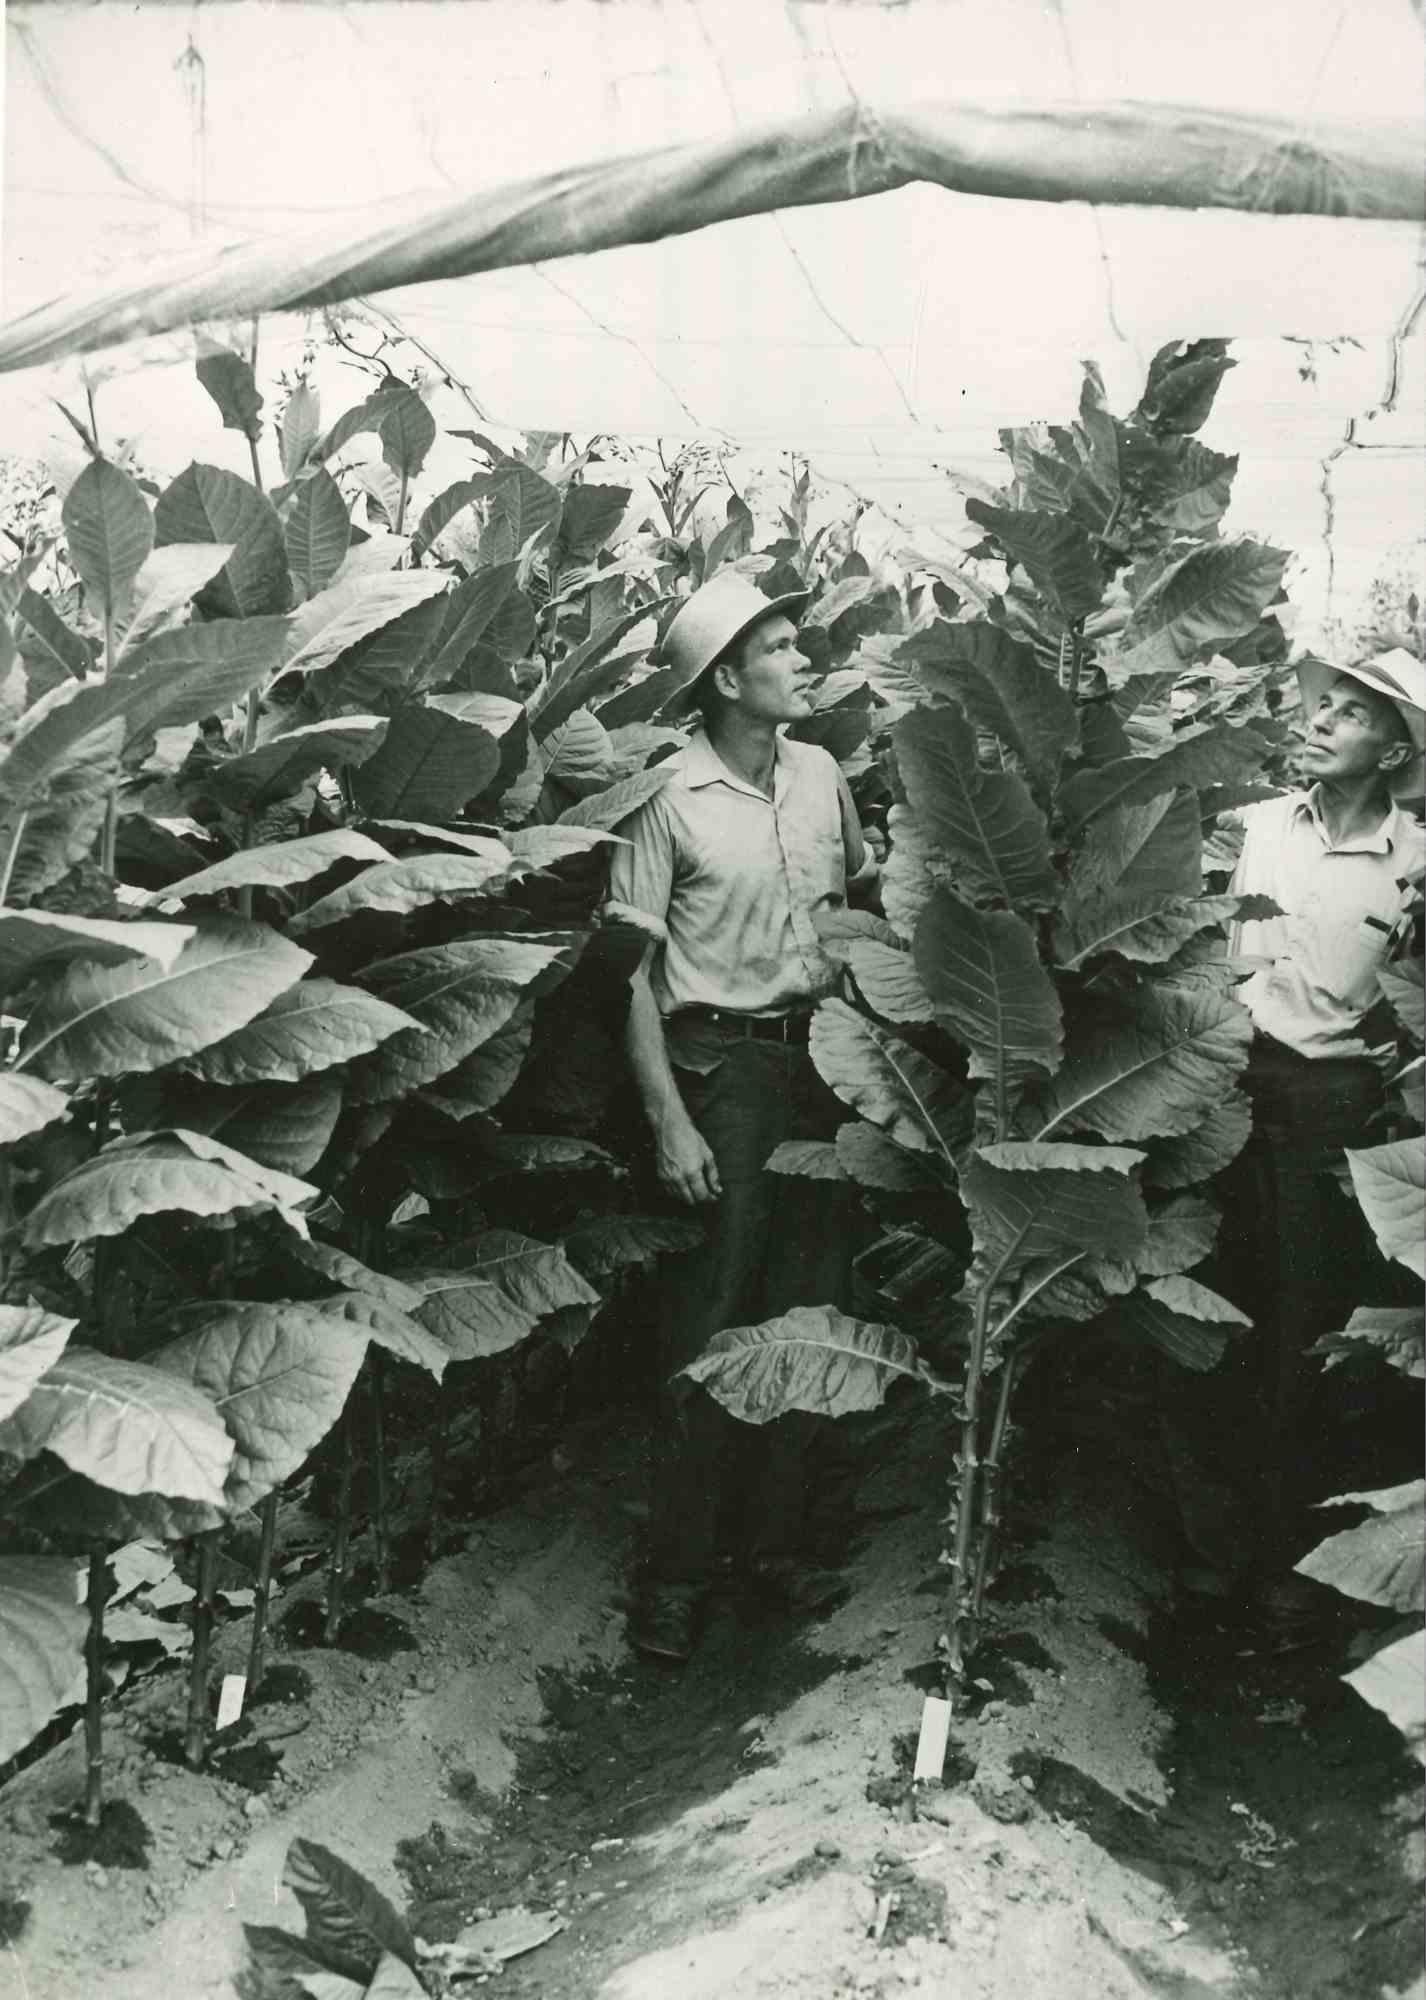 Unknown Figurative Photograph - Agriculture - American Vintage Photograph - Mid 20th Century